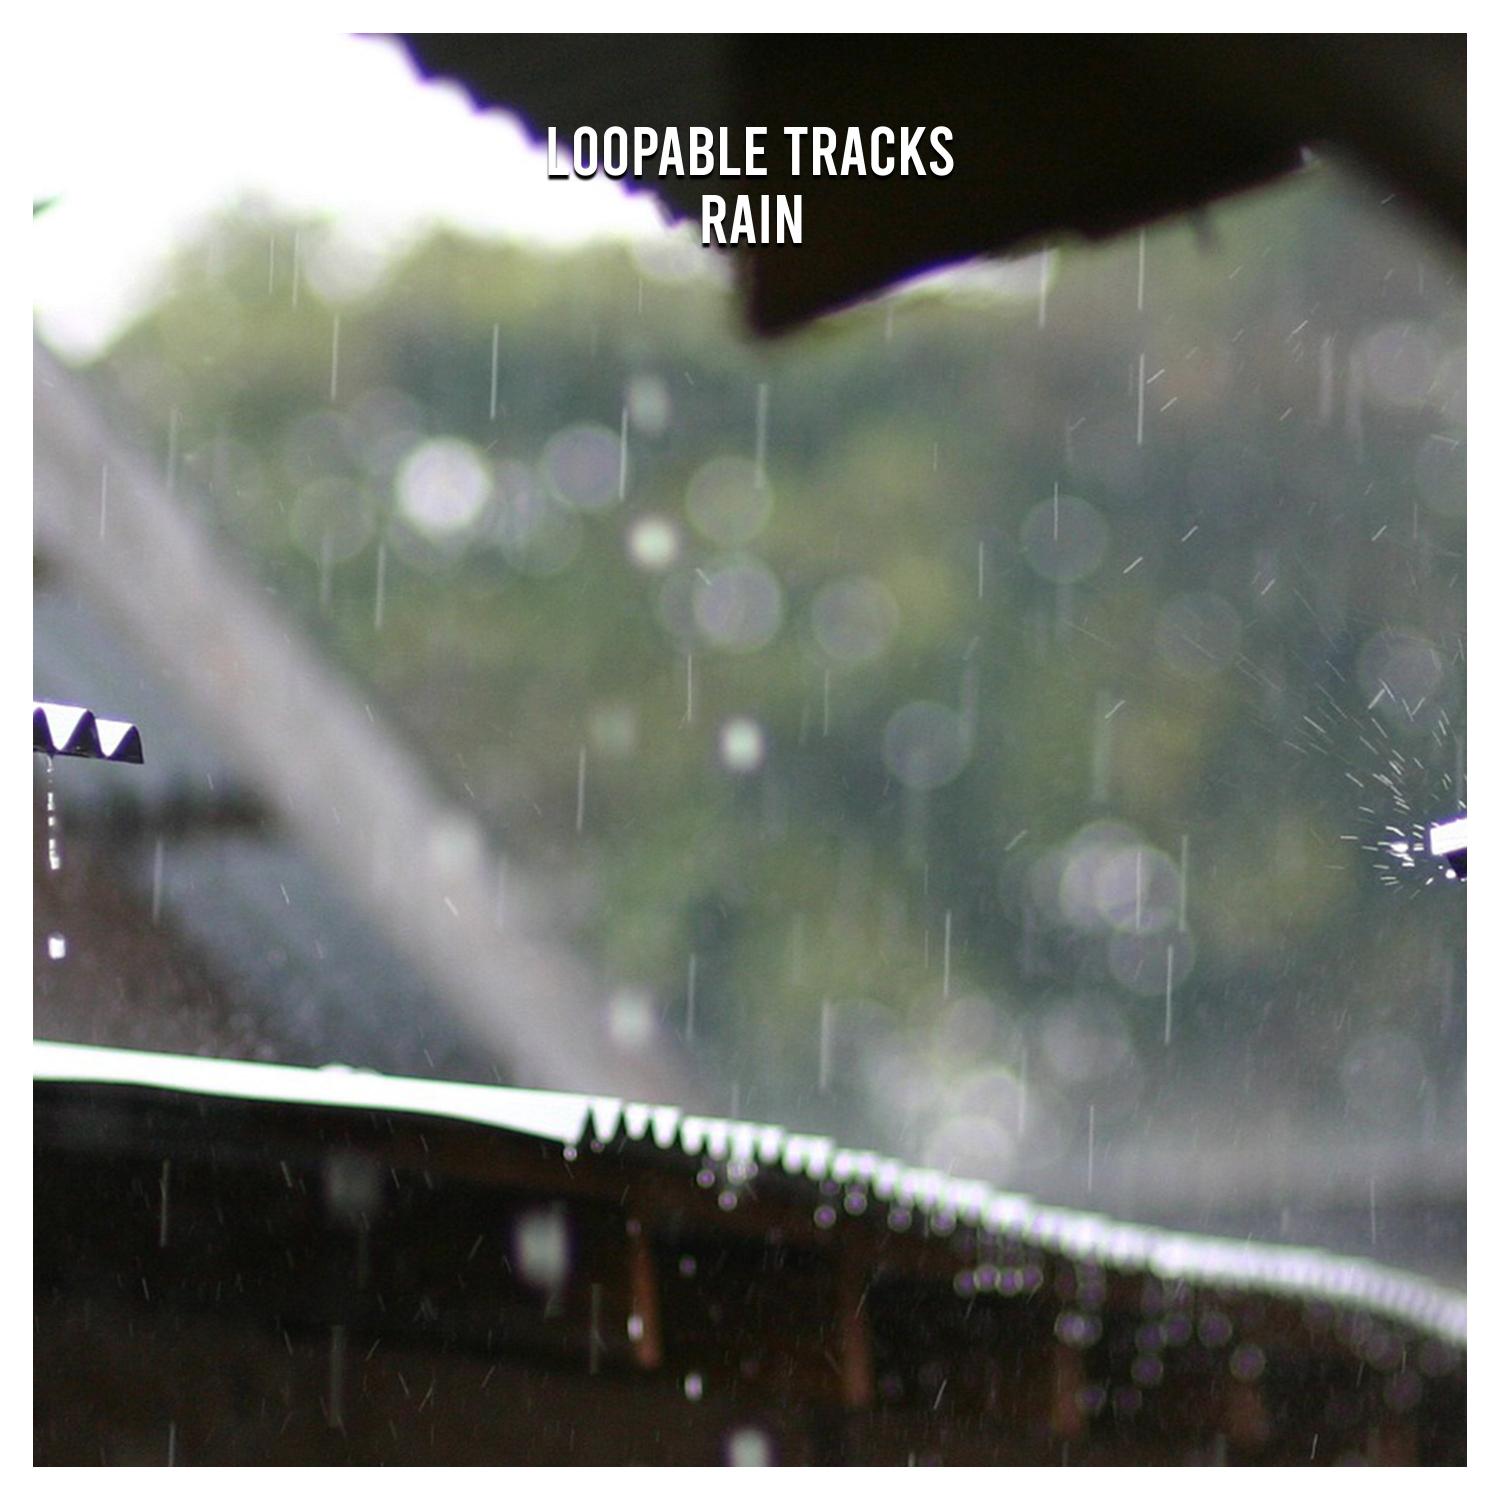 14 Loopable Tracks of Rain to Remove Stress and Relax